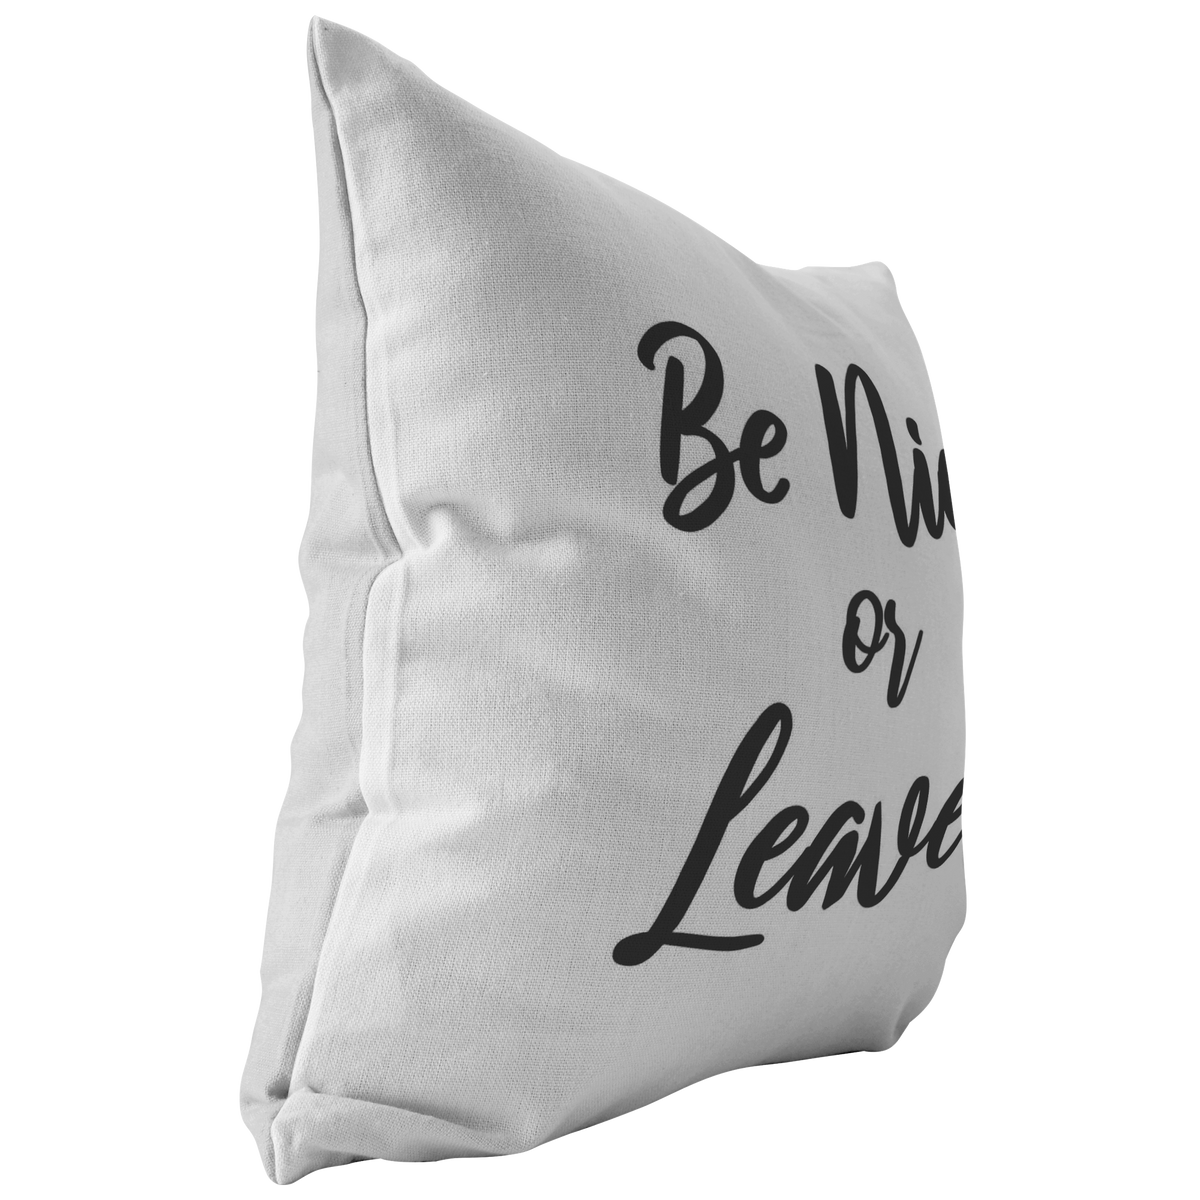 Awesome Sayings Throw Pillow Be Nice or Leave